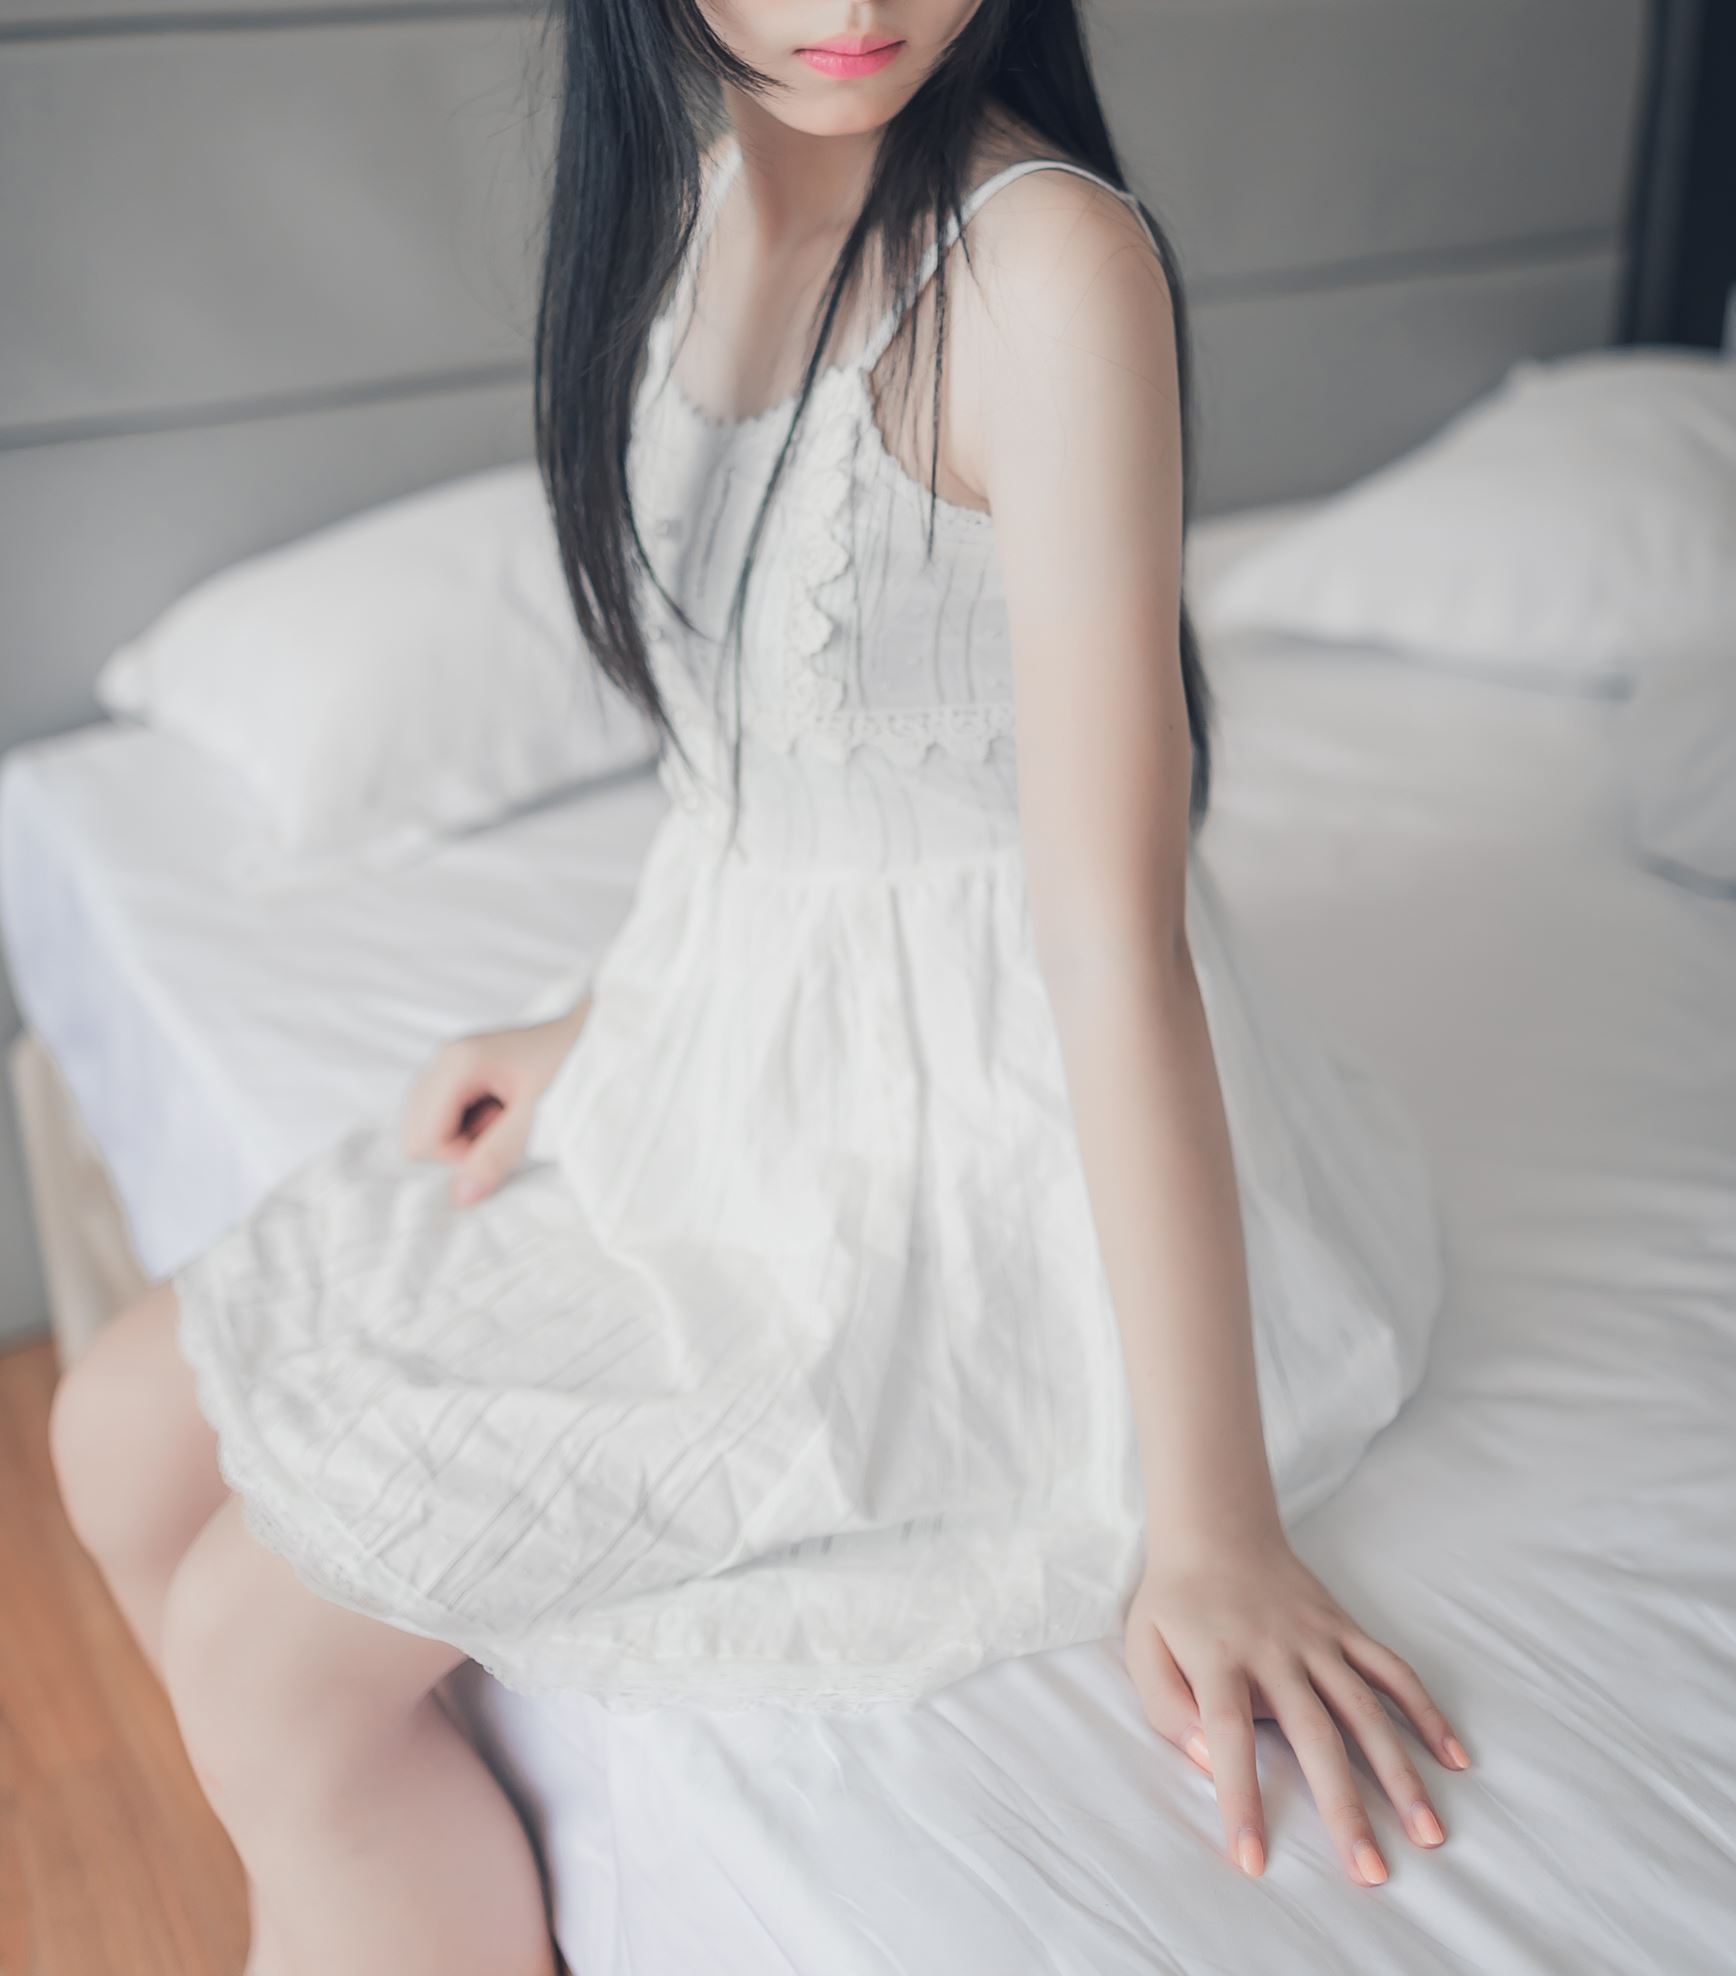 Meow sugar reflects the innocent smile of vol.006